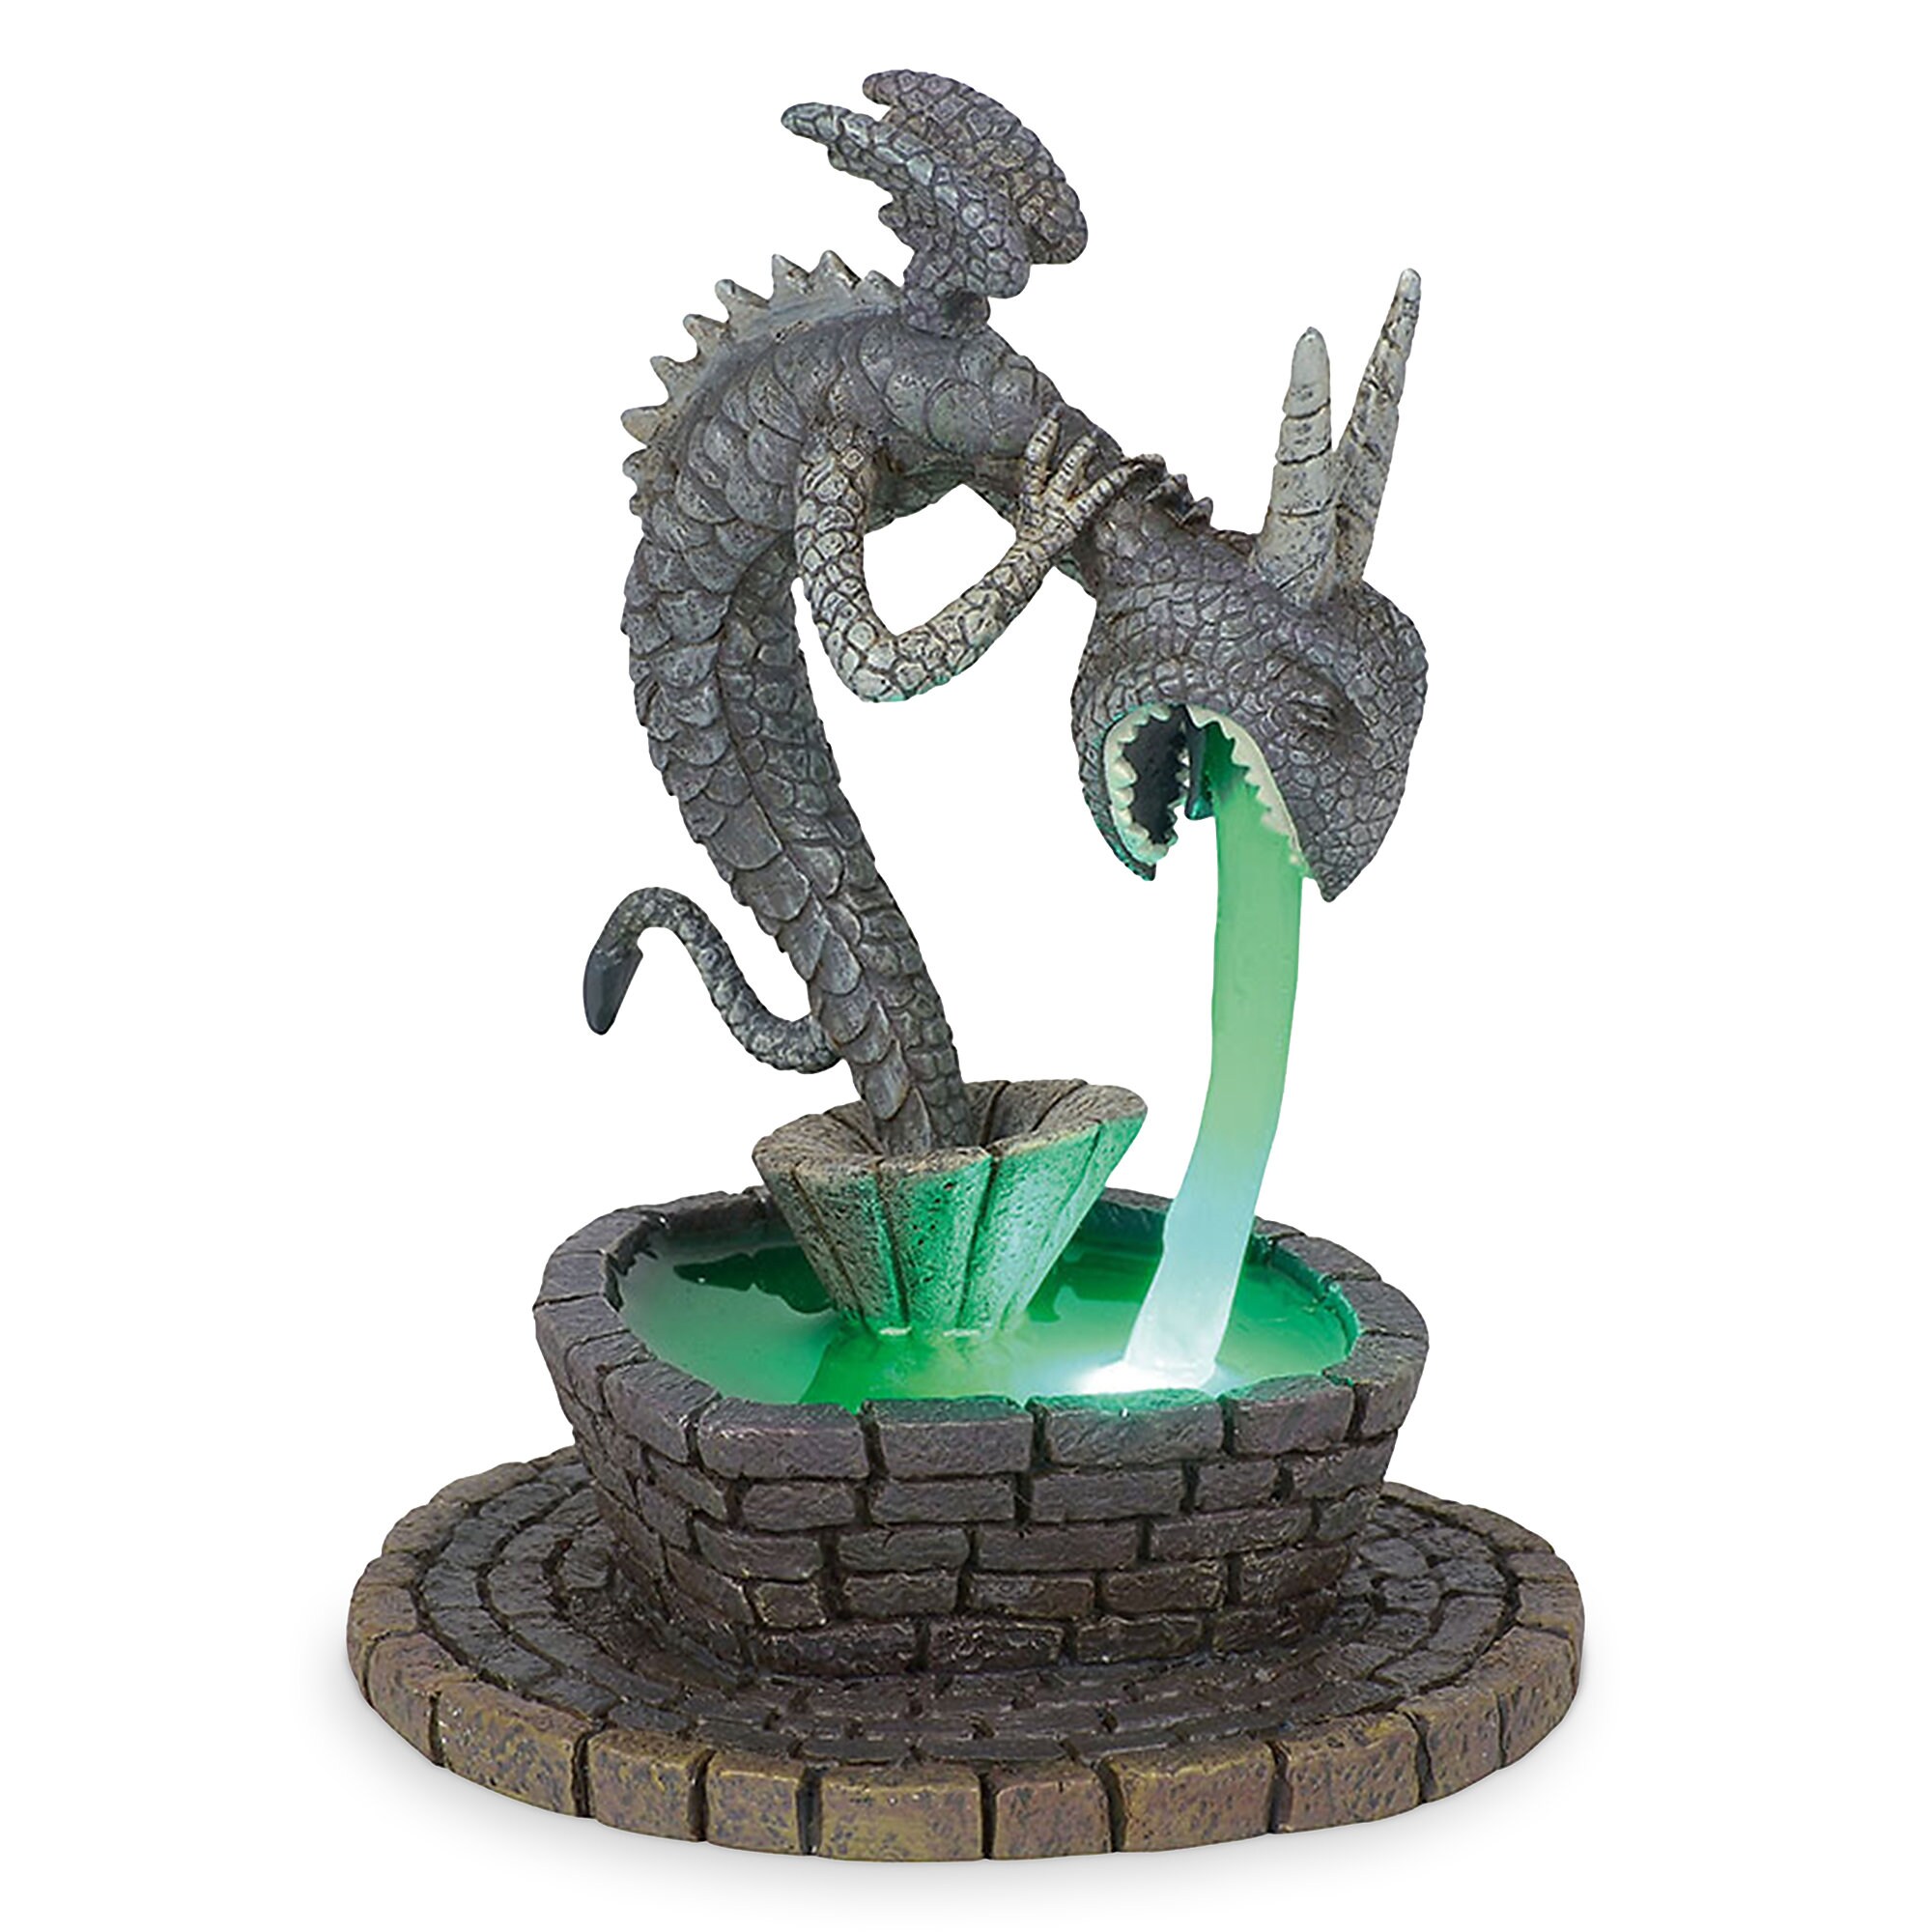 Halloween Town Fountain Figurine by Dept. 56 - Nightmare Before Christmas